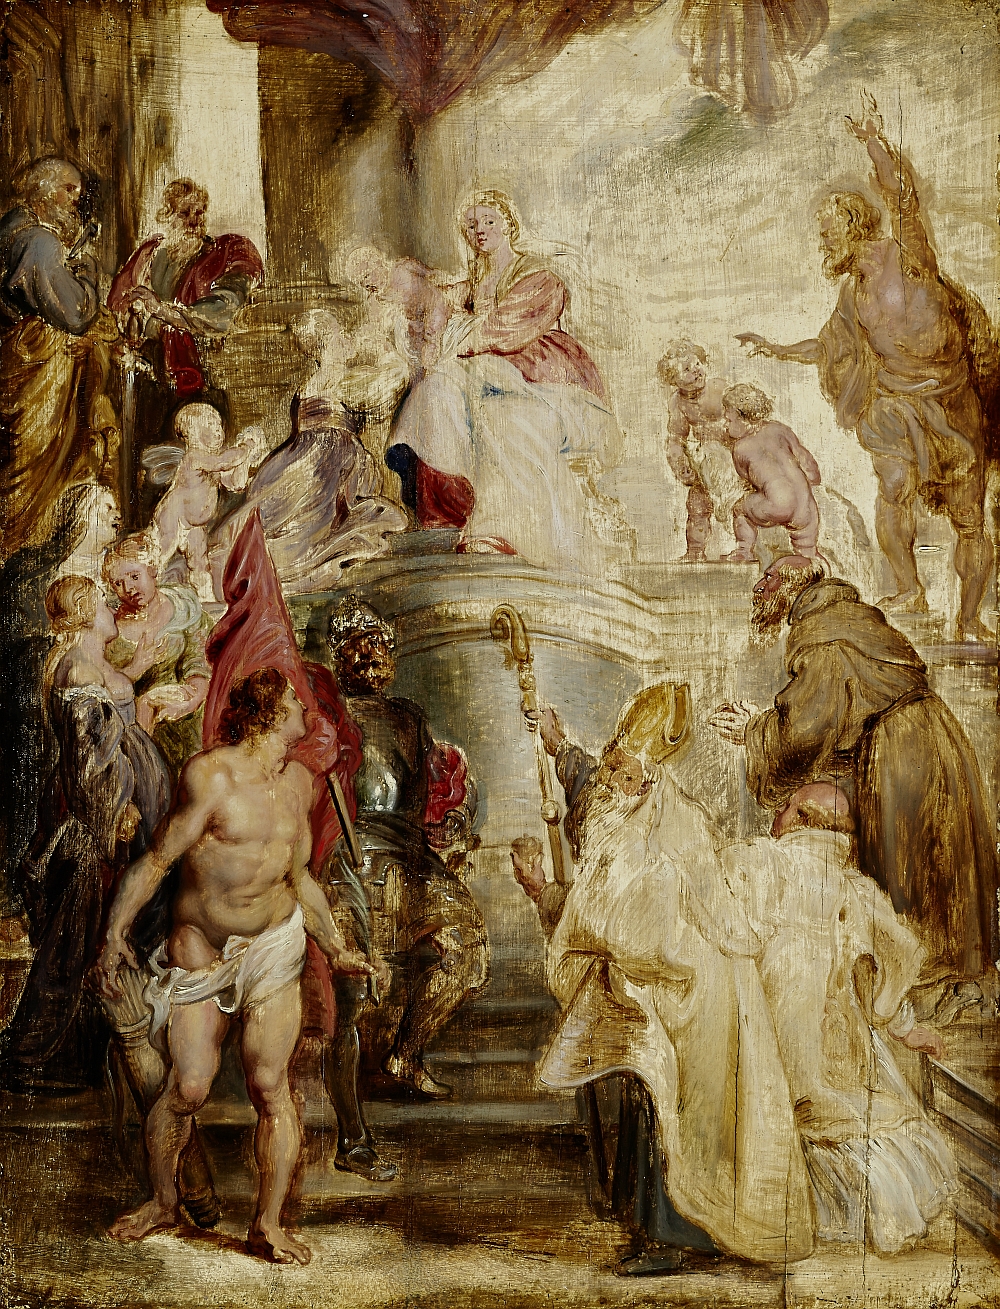 The Mystic Marriage of Saint Catherine, Peter Paul Rubens, 1628, oil on oak wood, inv. no. RO 0357; one of the designs for the high altarpiece in the Augustinian Church in Antwerp